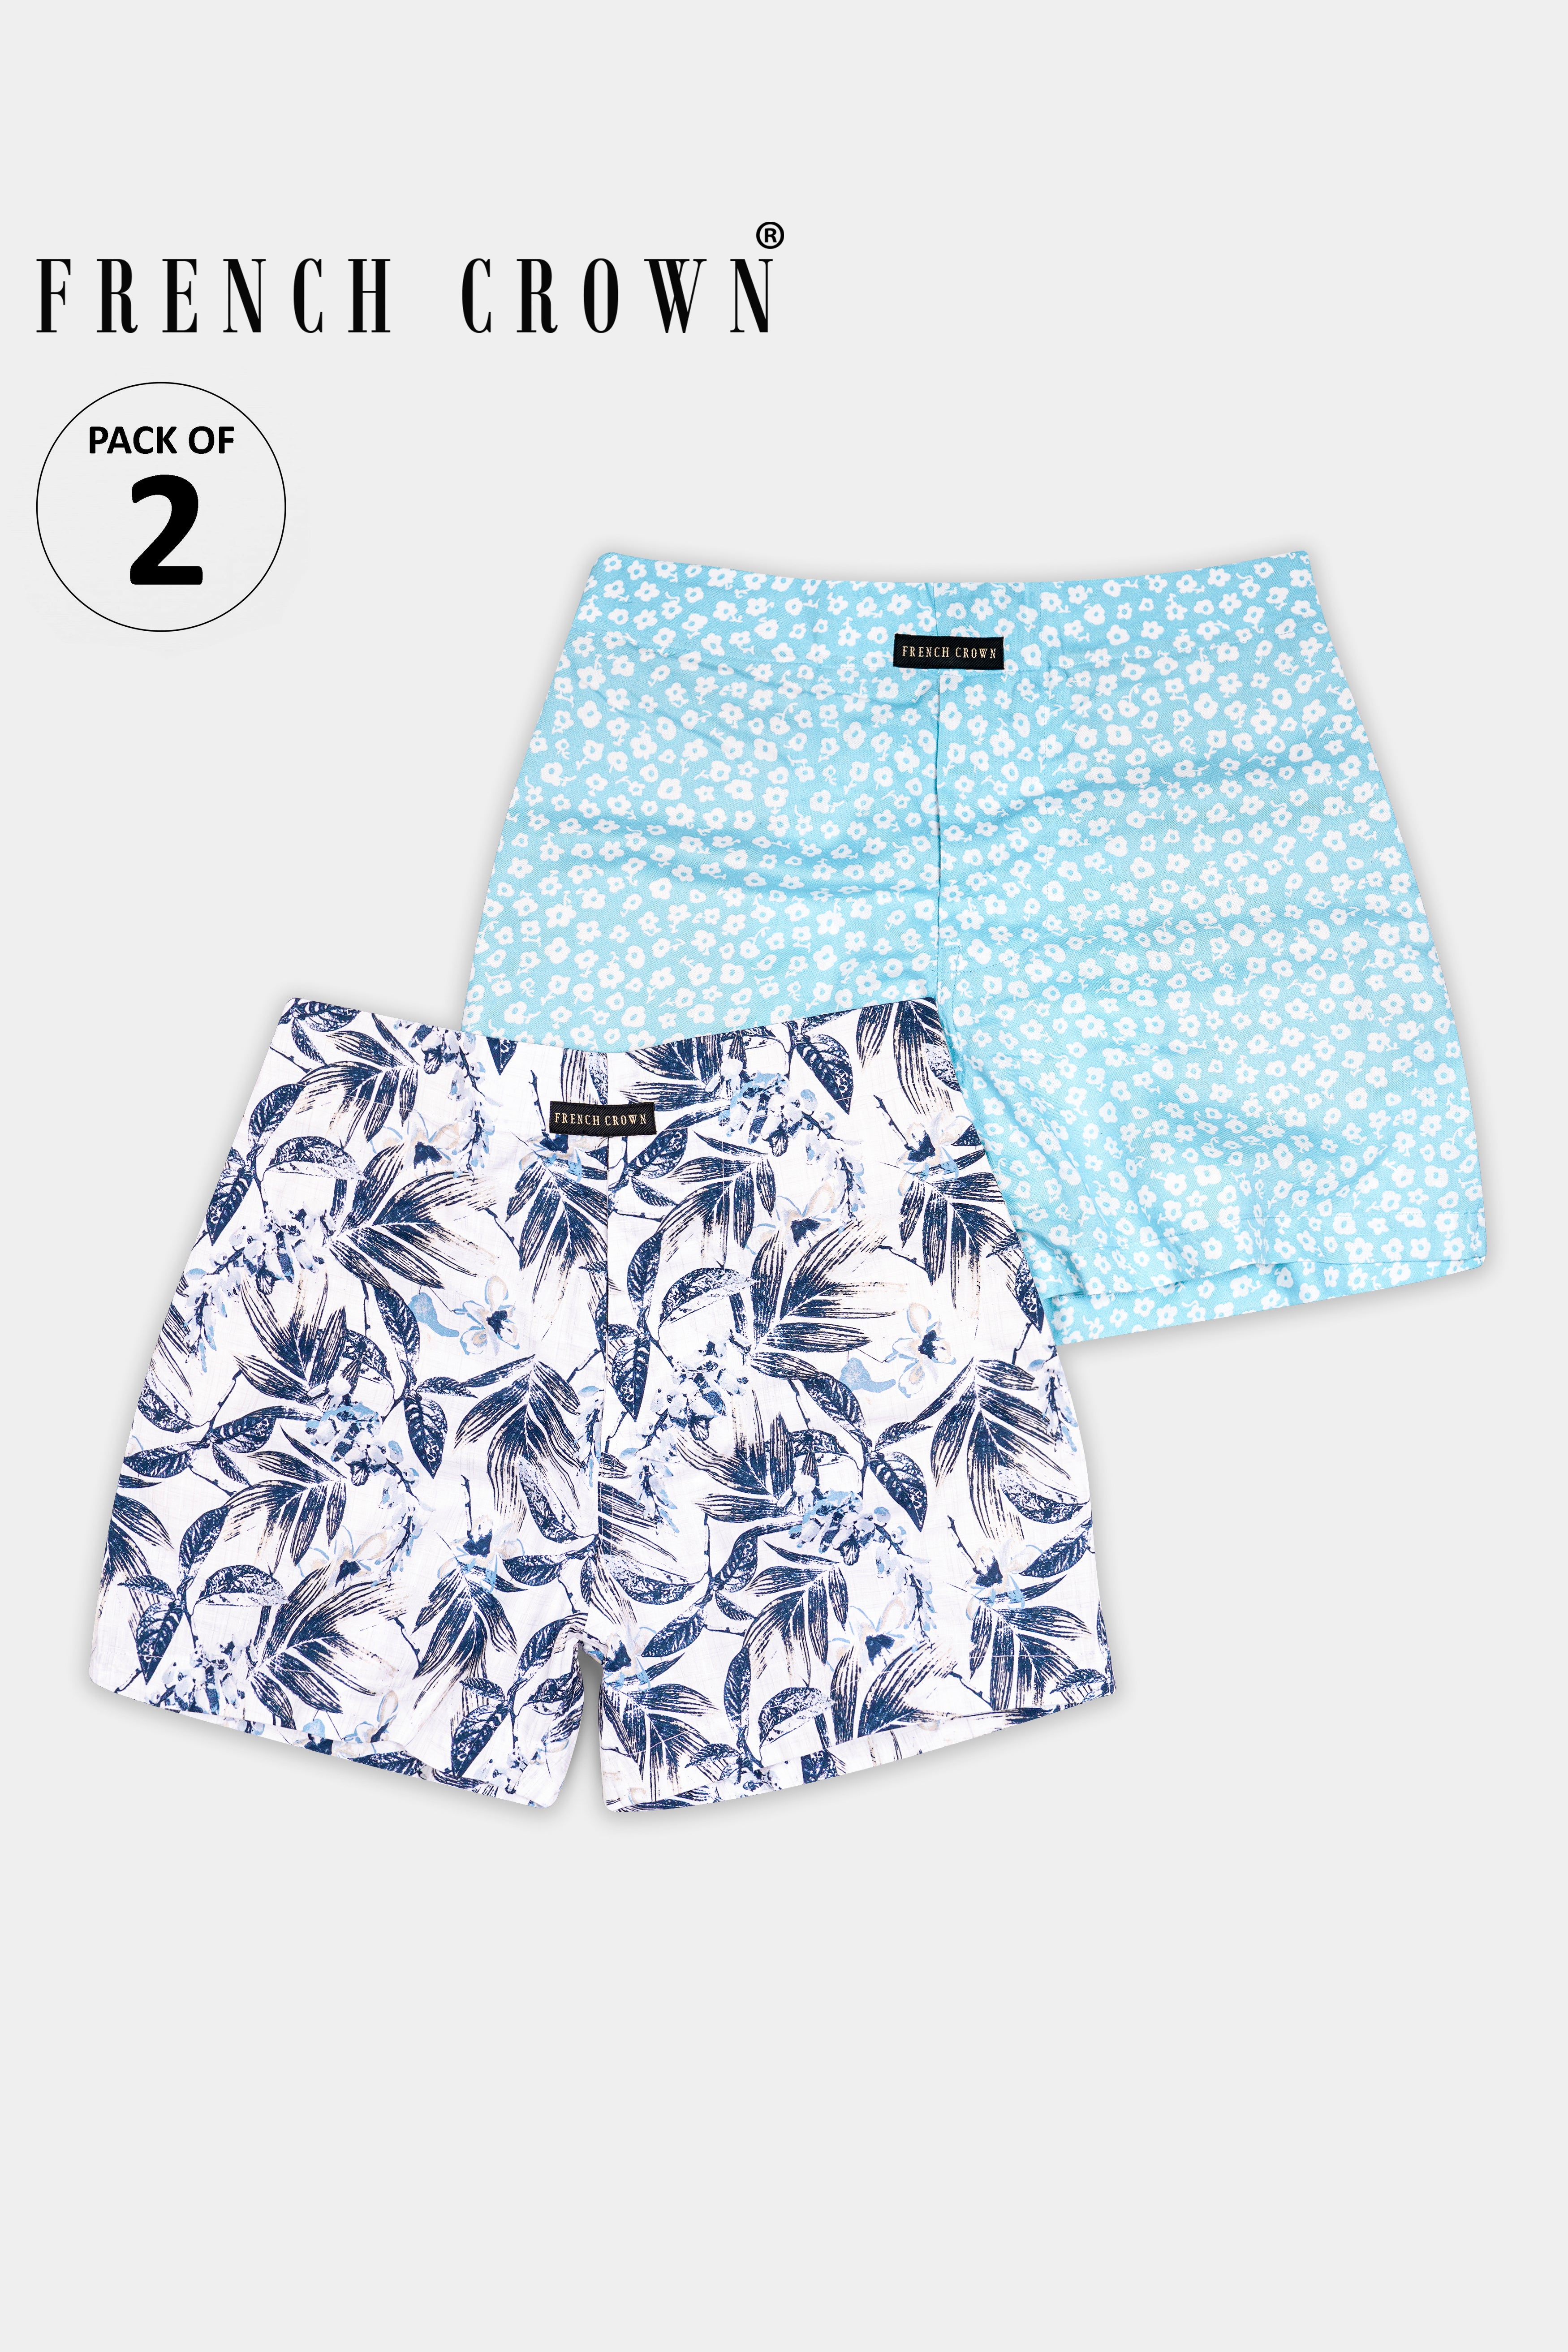 Glacier Blue With White Ditsy Printed Premium Tencel and Bright White with Rhino Blue Leaves Printed Dobby Textured Giza Cotton Boxers BX547-BX550-28, BX547-BX550-30, BX547-BX550-32, BX547-BX550-34, BX547-BX550-36, BX547-BX550-38, BX547-BX550-40, BX547-BX550-42, BX547-BX550-44